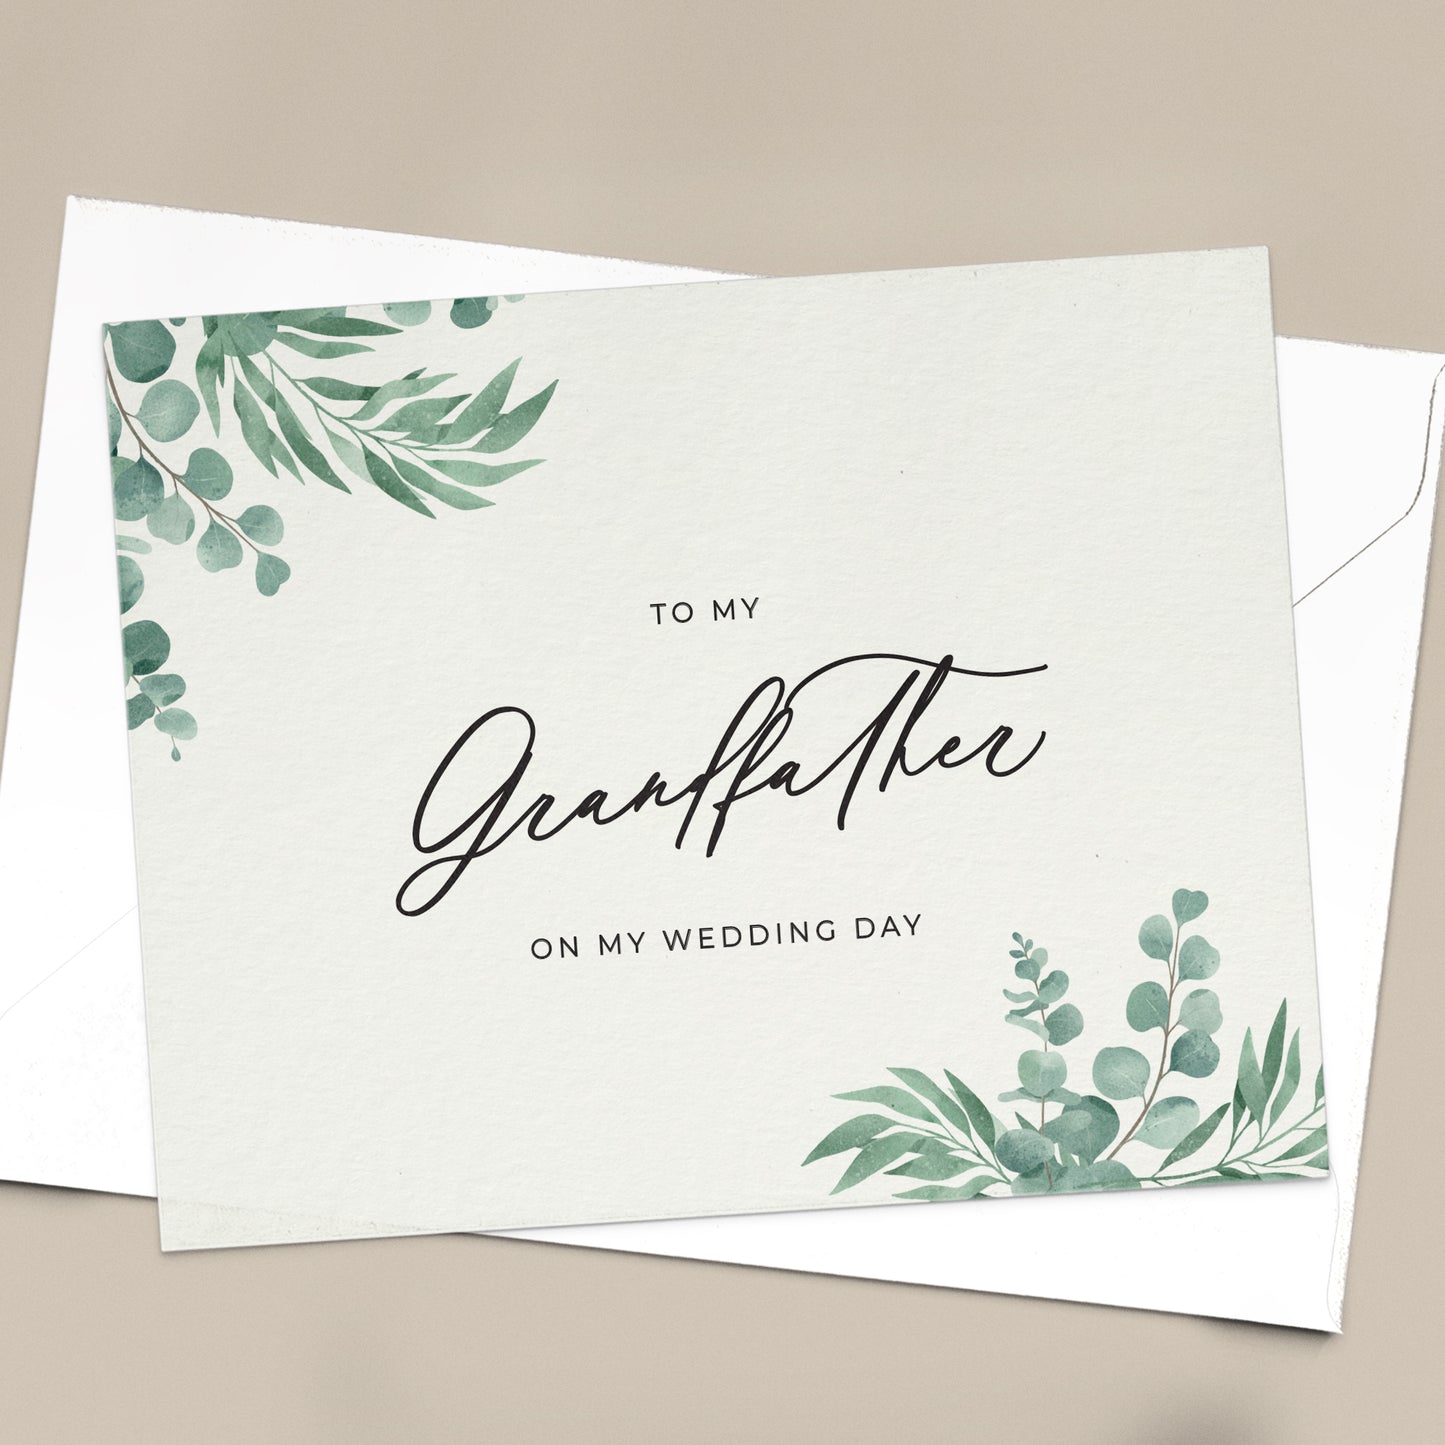 To my grandfather on my wedding day note card in greenery design with eucalyptus leaves and calligraphy font from XOXOKristen.